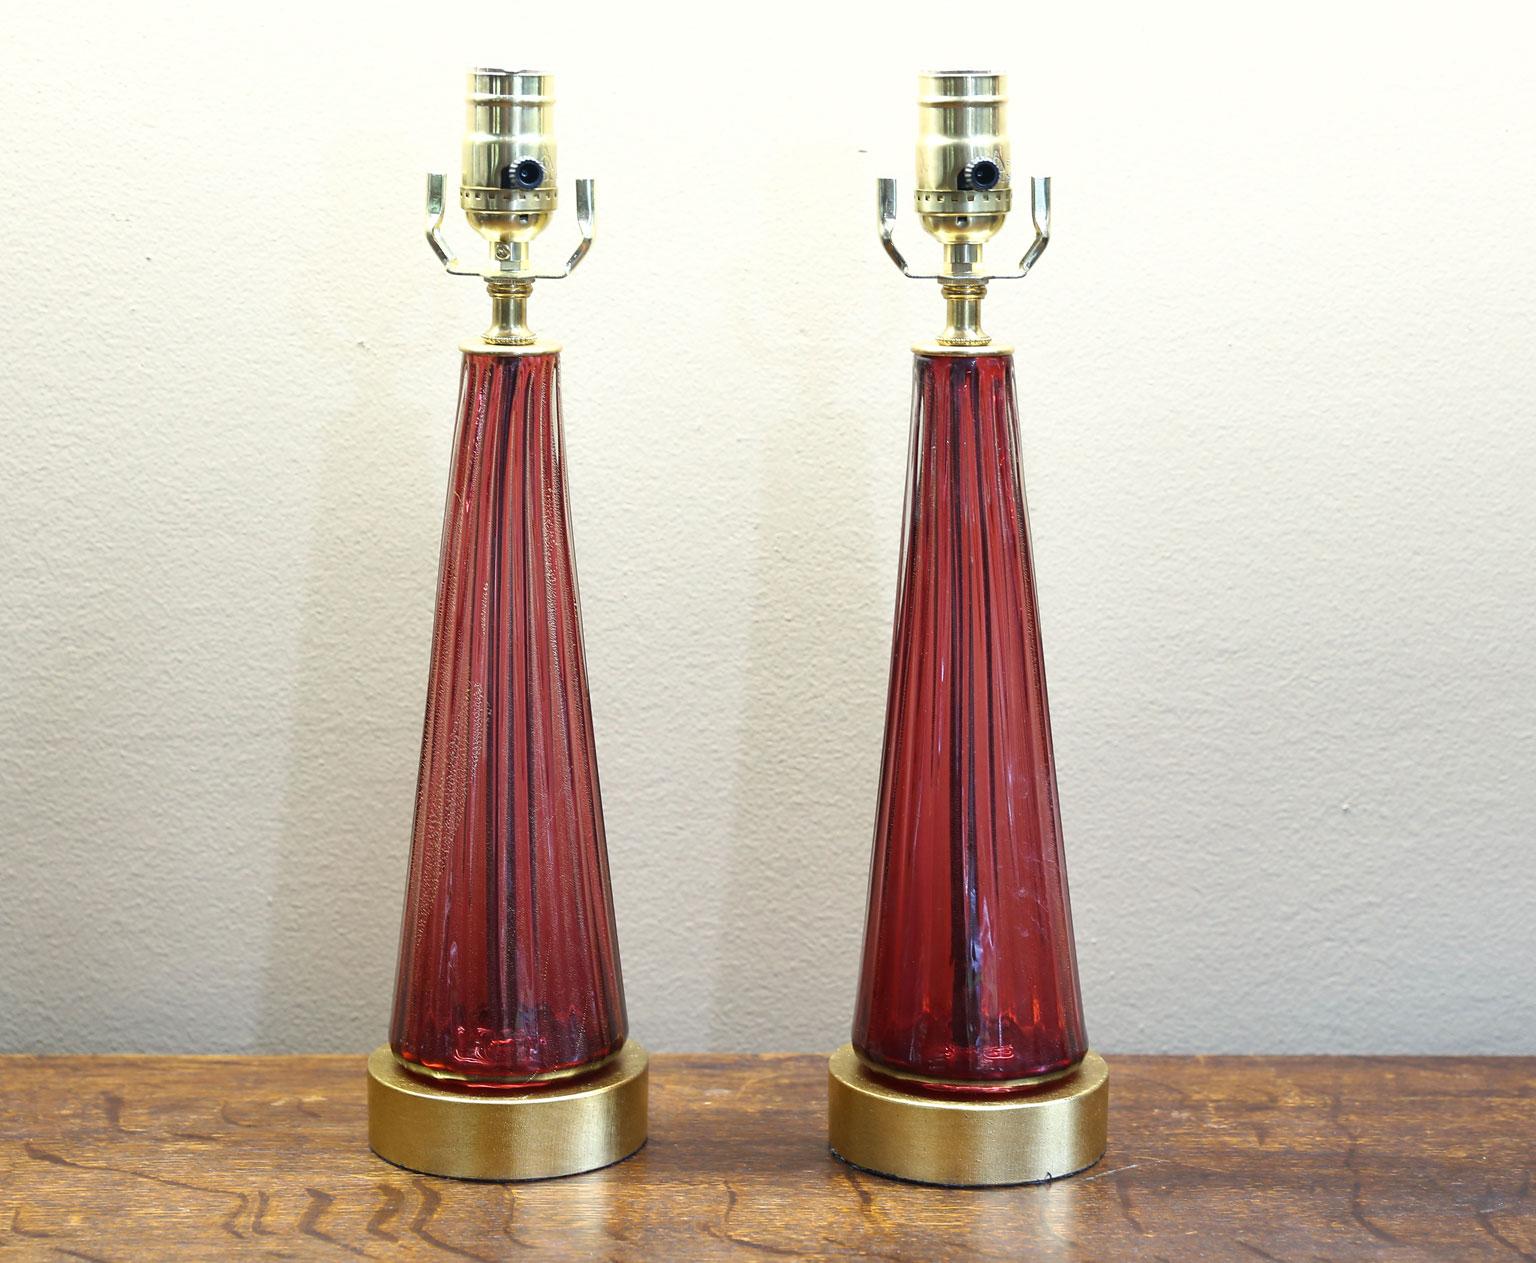 This charming pair of Murano blown glass table lamps has been newly wired for the US using a gold-colored silk cord. The color is a raspberry color with gold flecks. The glass has a pattern of flared reeds. The height is to the top of the socket.